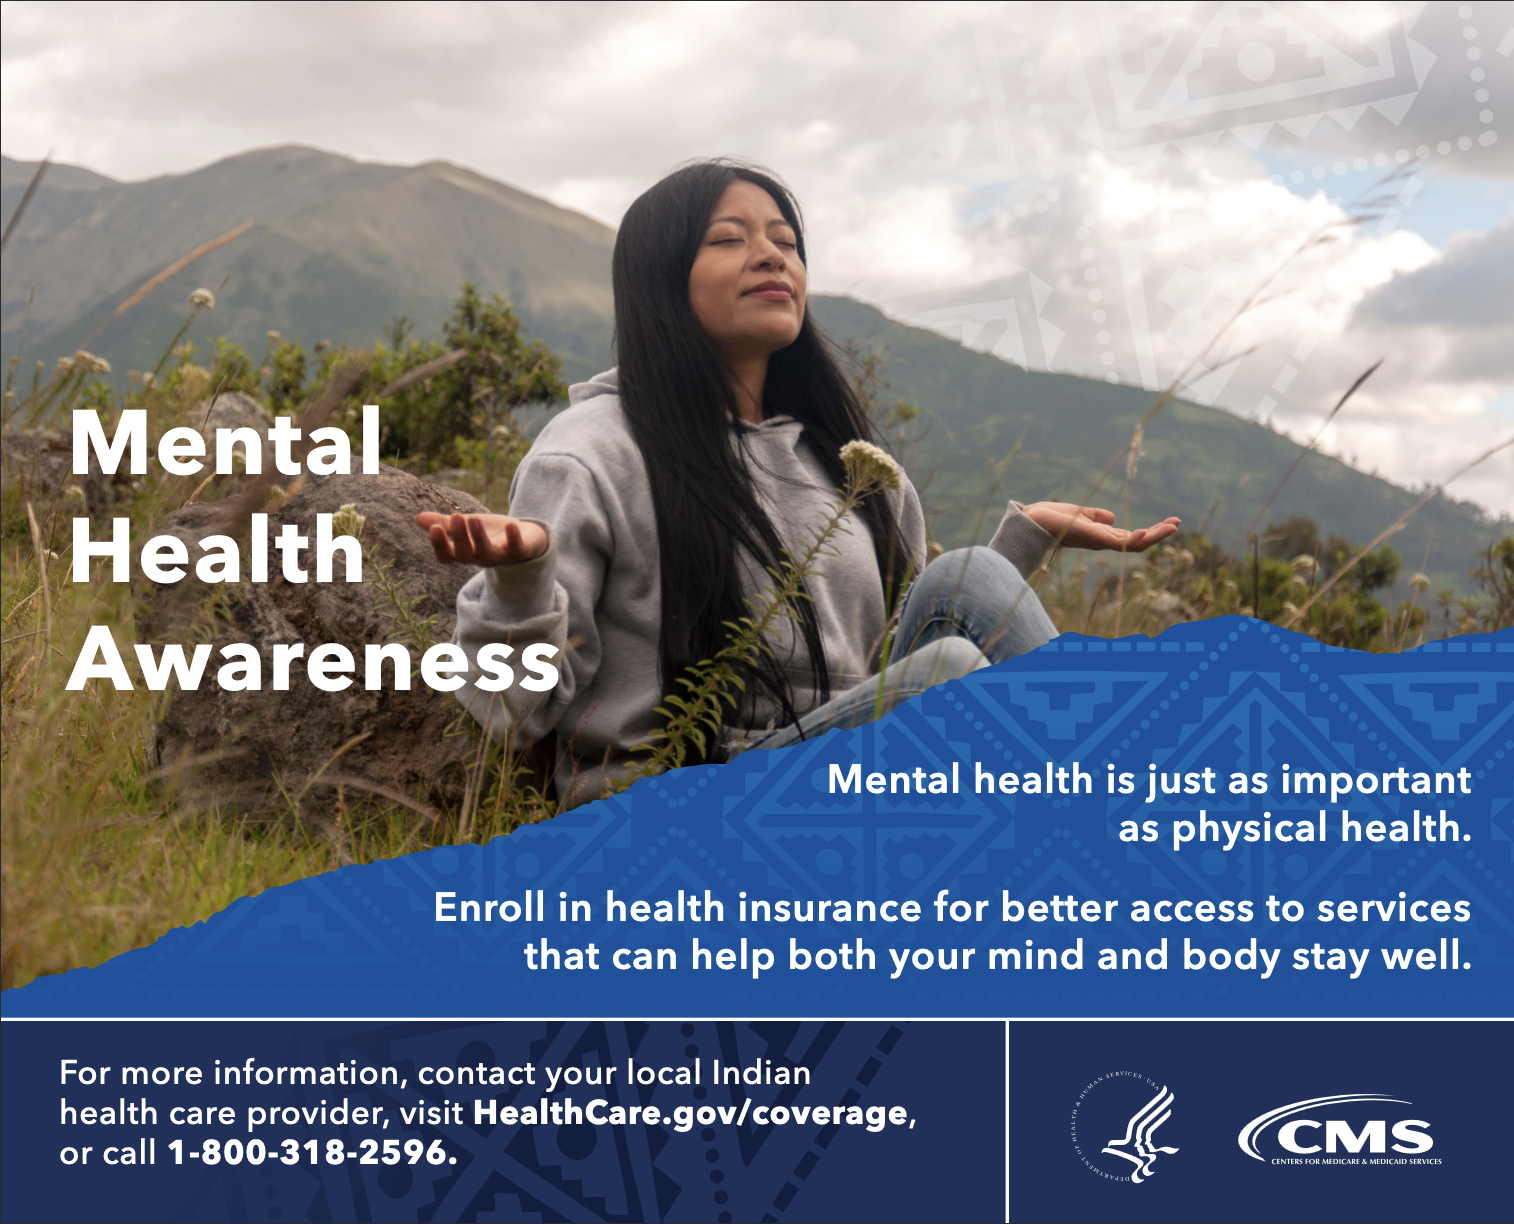 Mental health is just as important as physical health. Enroll in health insurance for better access to services that can help both your mind and body stay well.